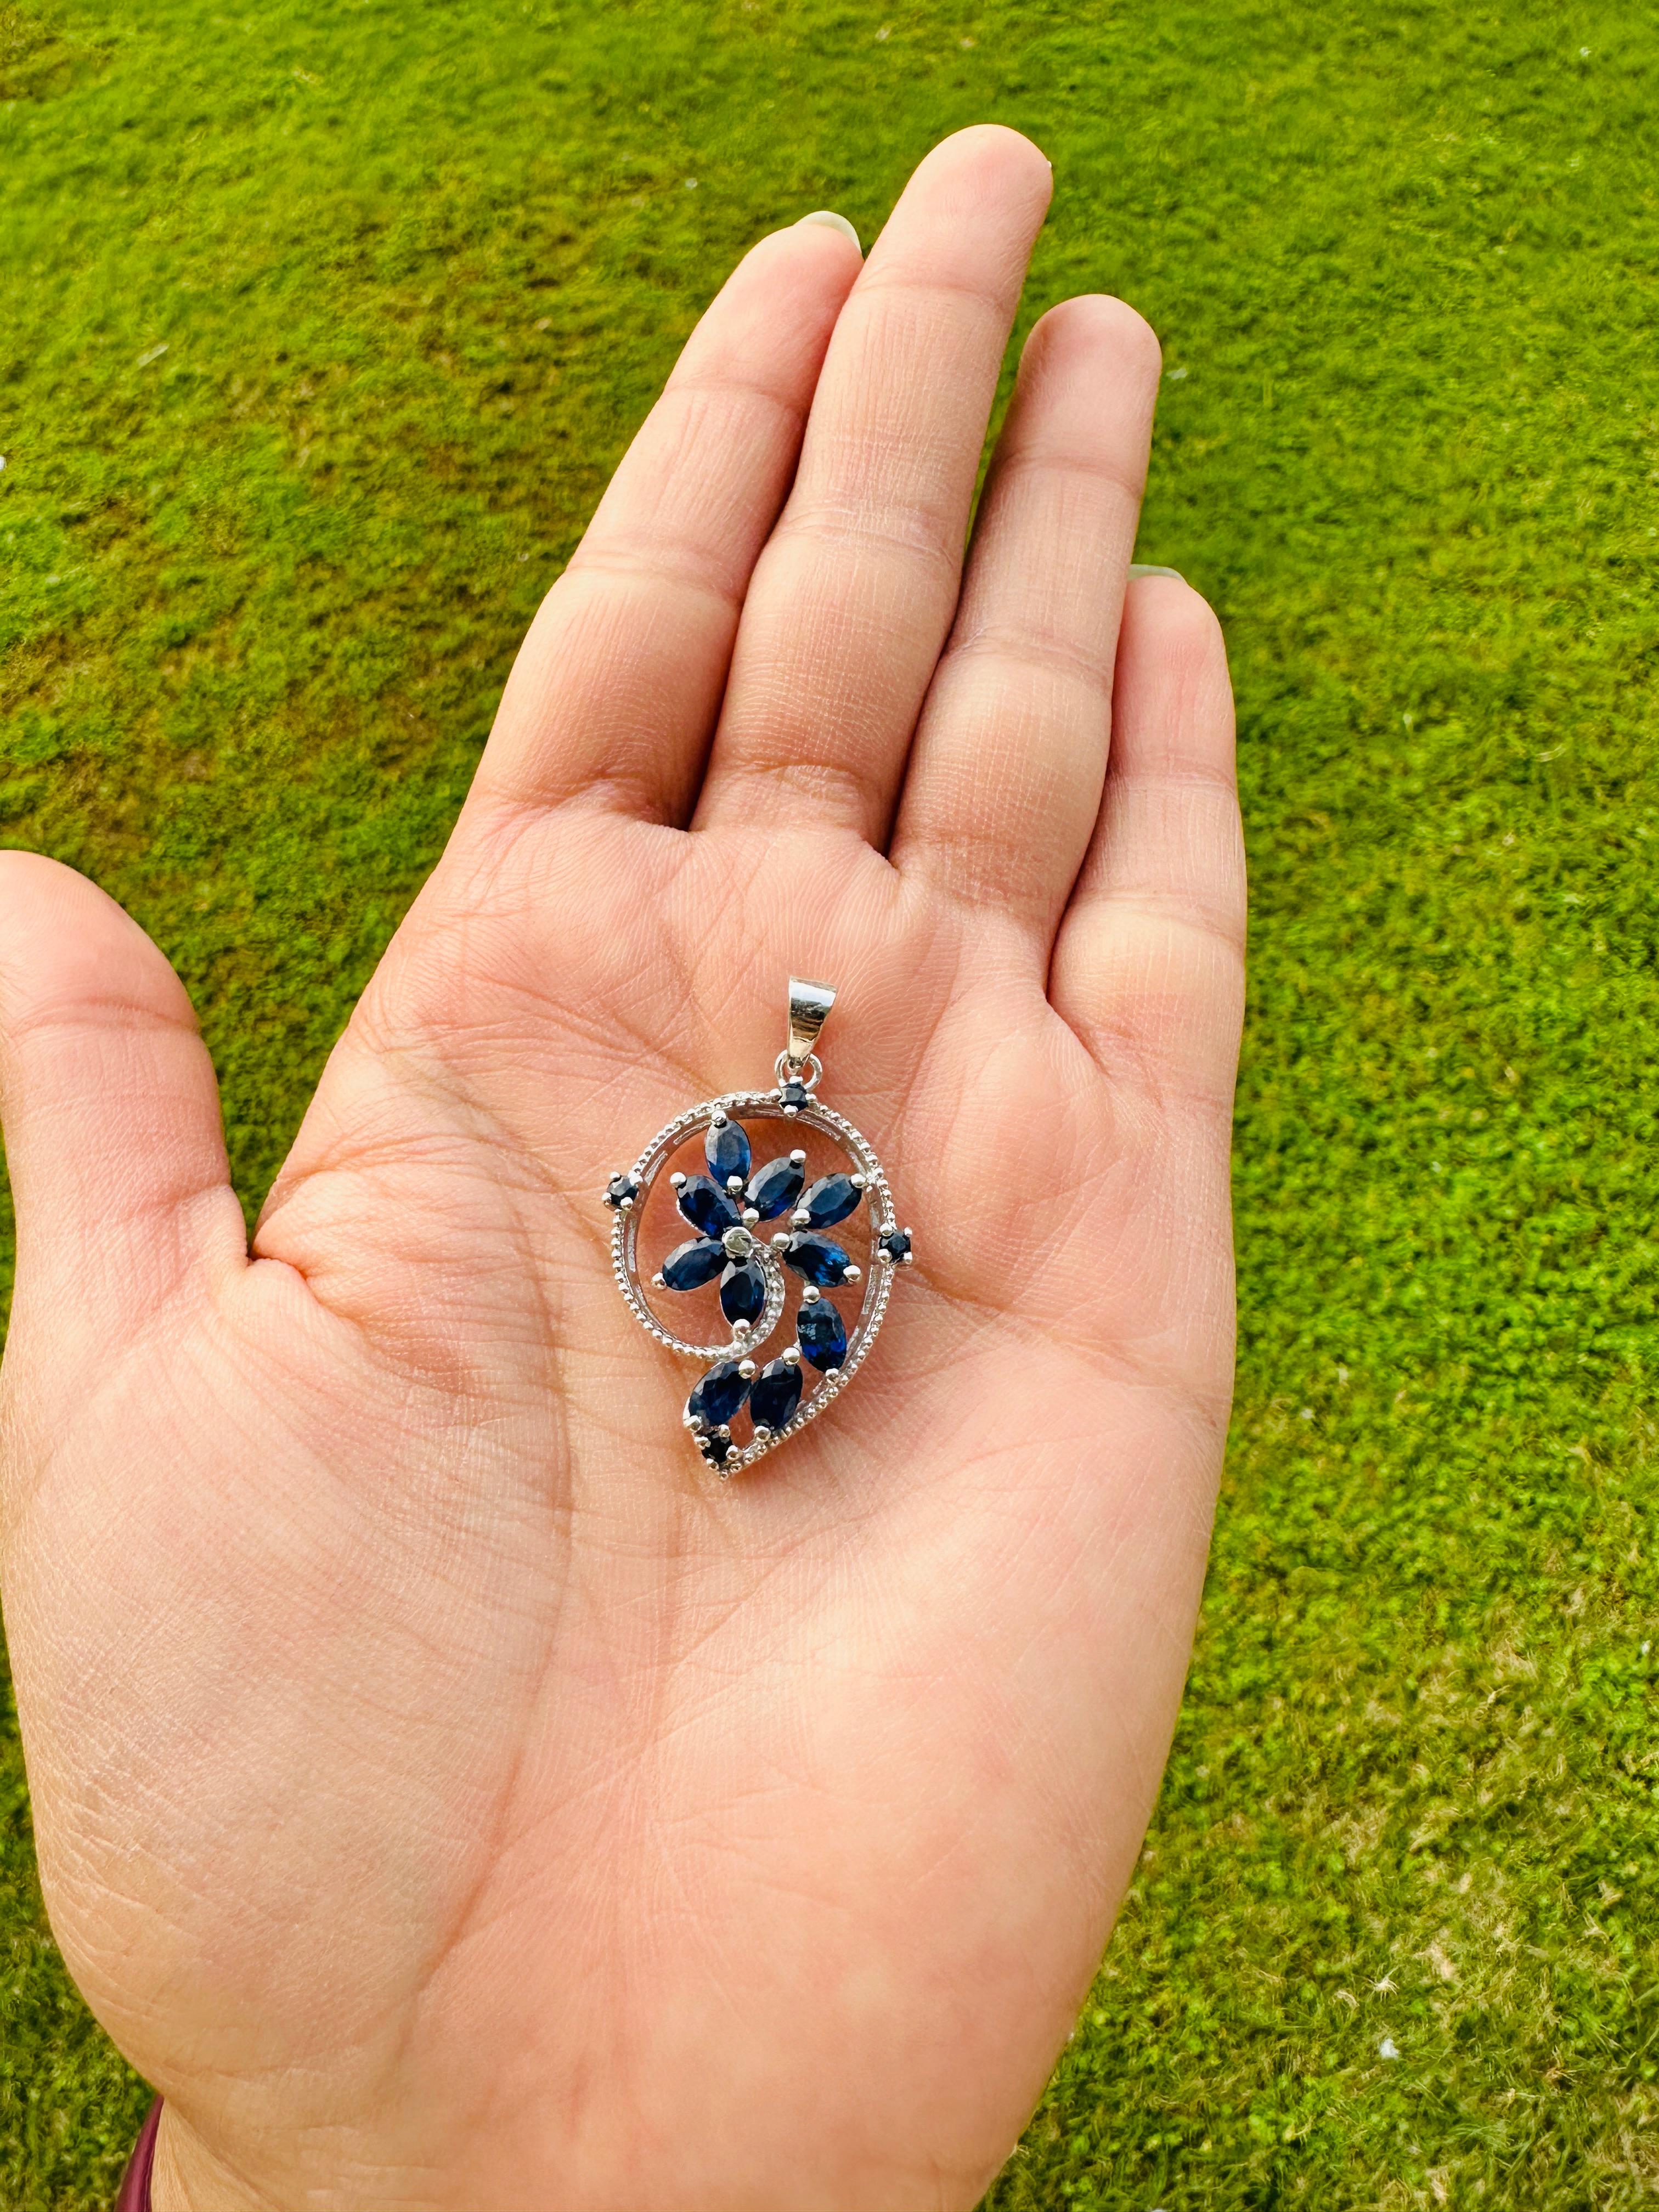 This Natural Blue Sapphire Wedding Pendant is meticulously crafted from the finest materials and adorned with stunning sapphire which helps in relieving stress, anxiety and depression.
This delicate to statement pendants, suits every style and